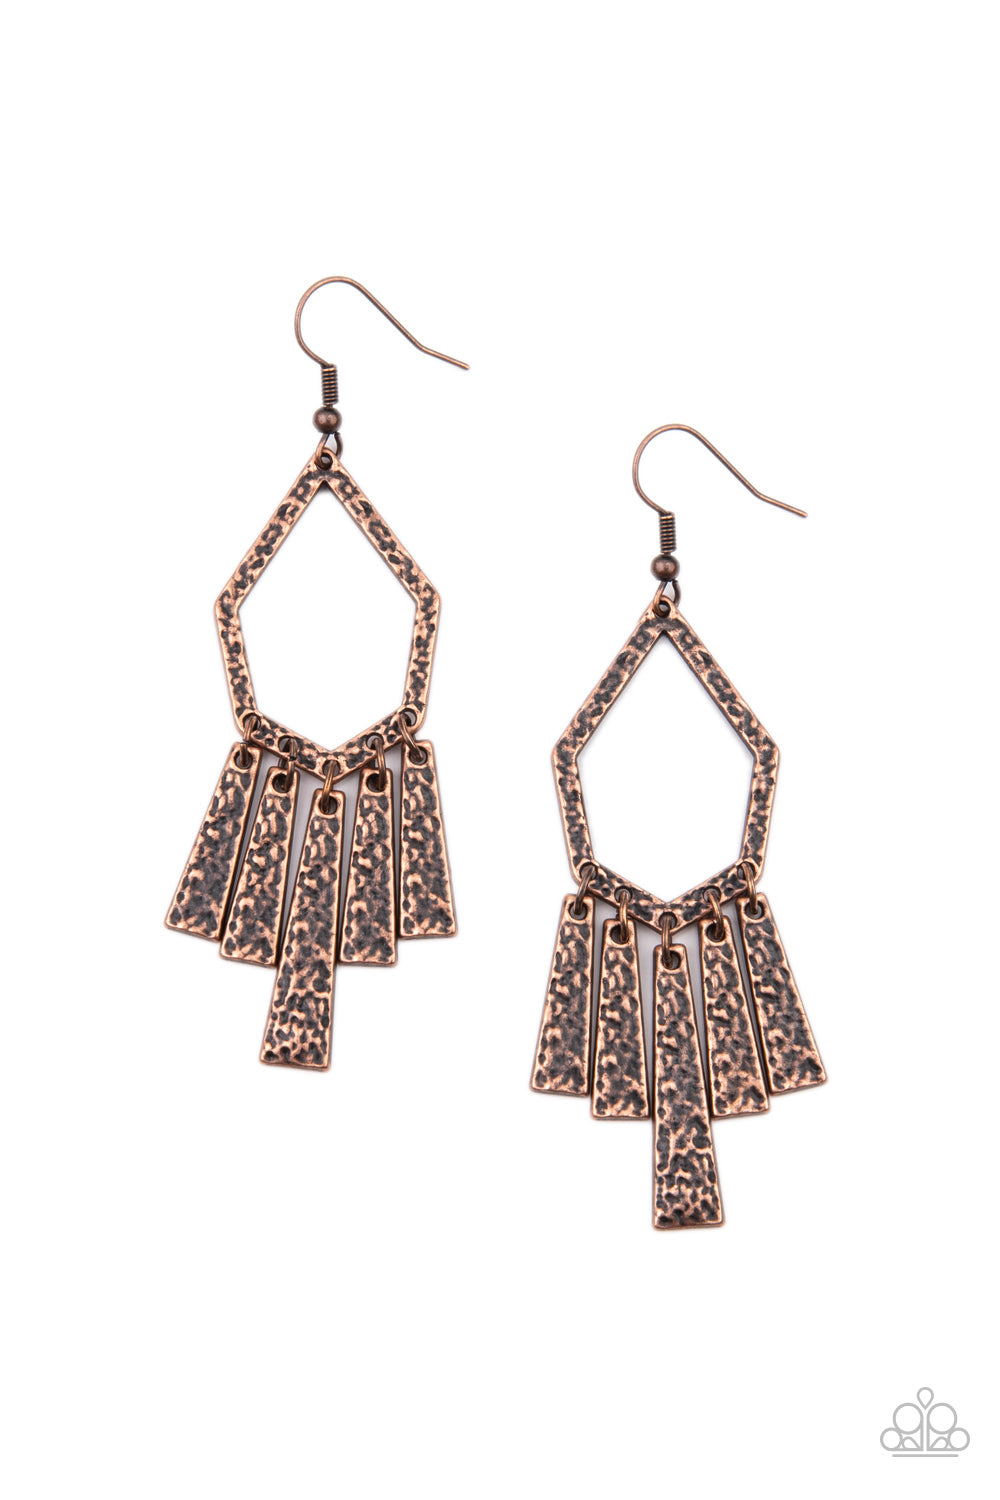 Museum Find - Copper Earrings - Princess Glam Shop